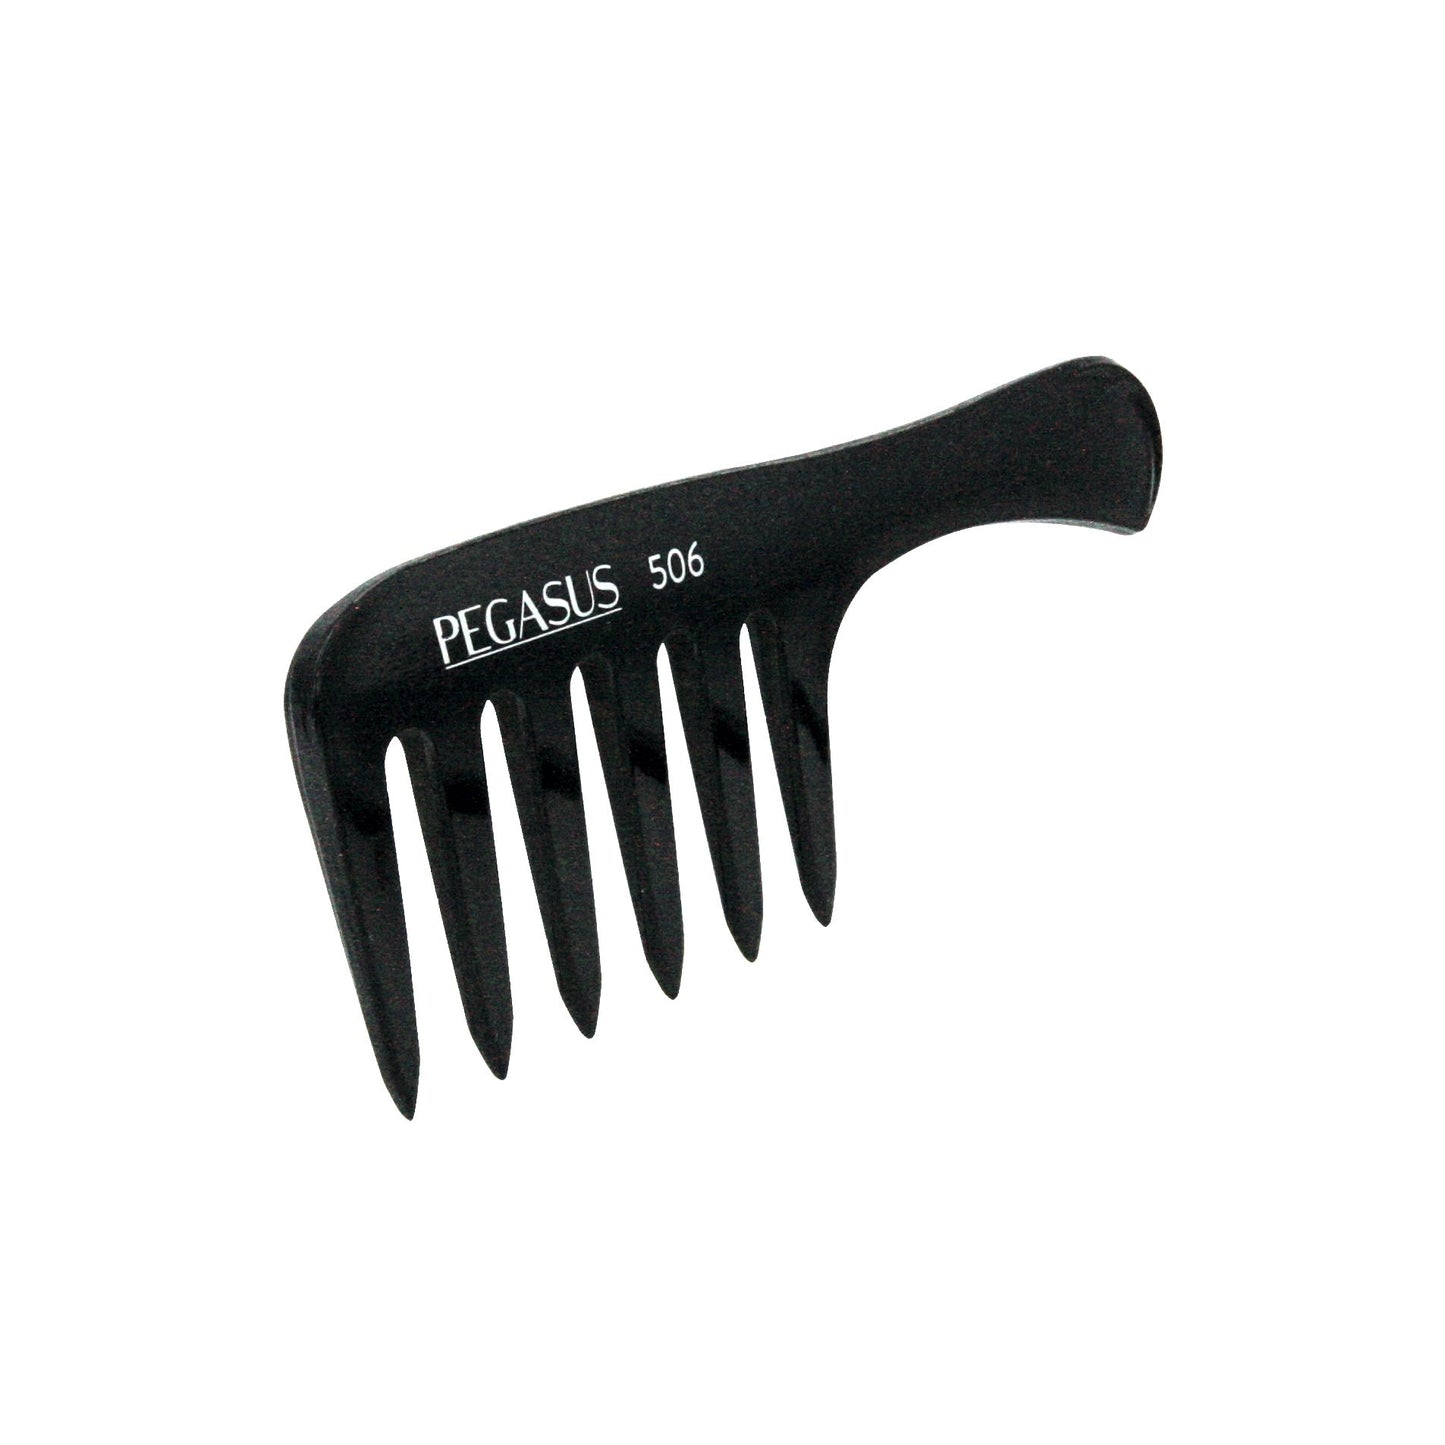 Pegasus 506, 6.5in Hard Rubber Detangling Handled Styling Rake Comb, Seamless, Smooth Edges, Anti Static, Heat and Chemically Resistant, Wet Hair, Everyday Grooming Comb | Peines de goma dura - Black